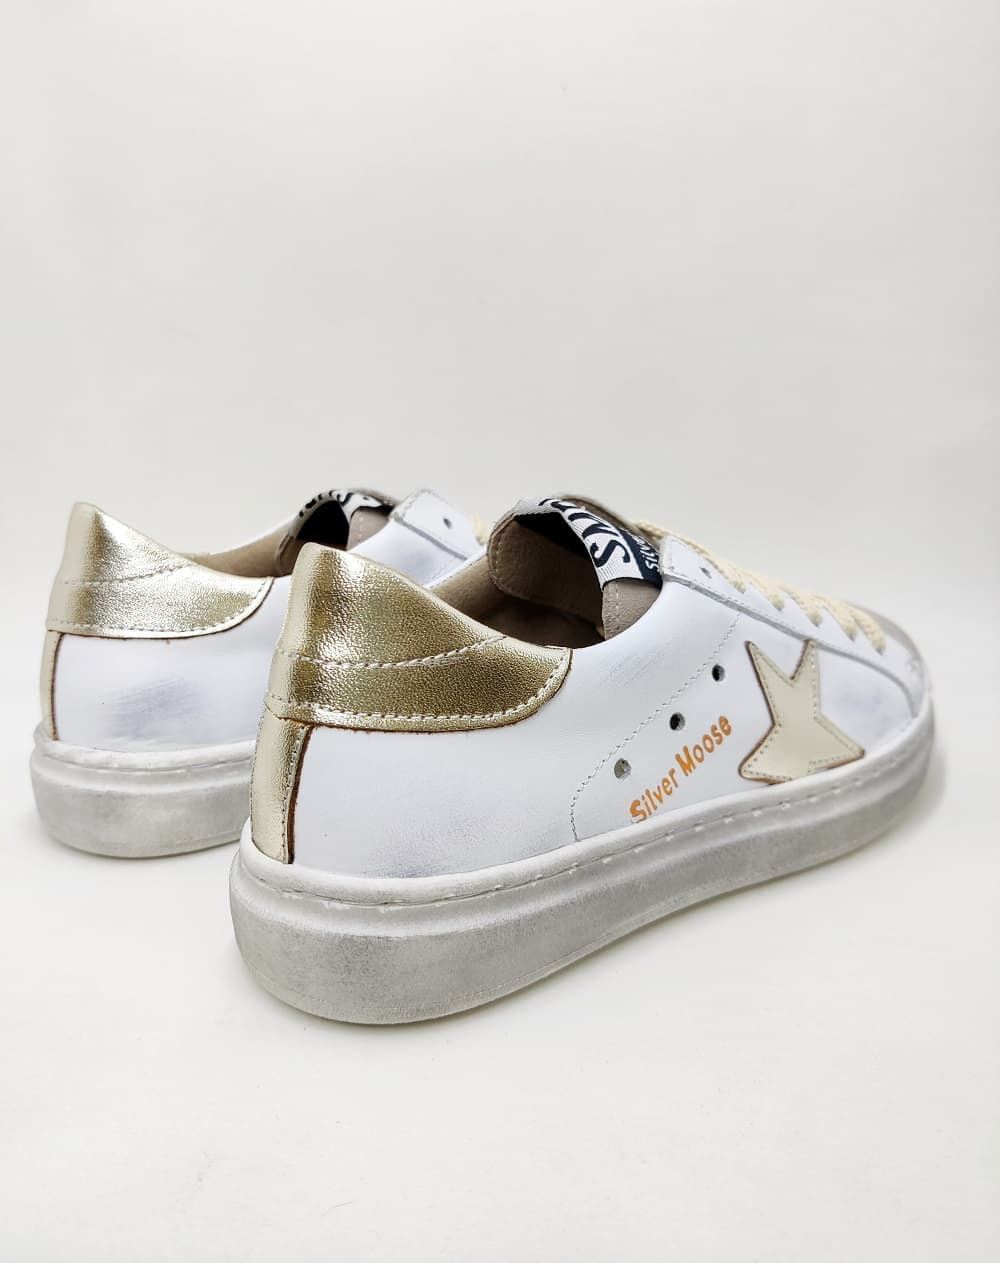 Golden Star sneakers in White/Gold leather - Image 3